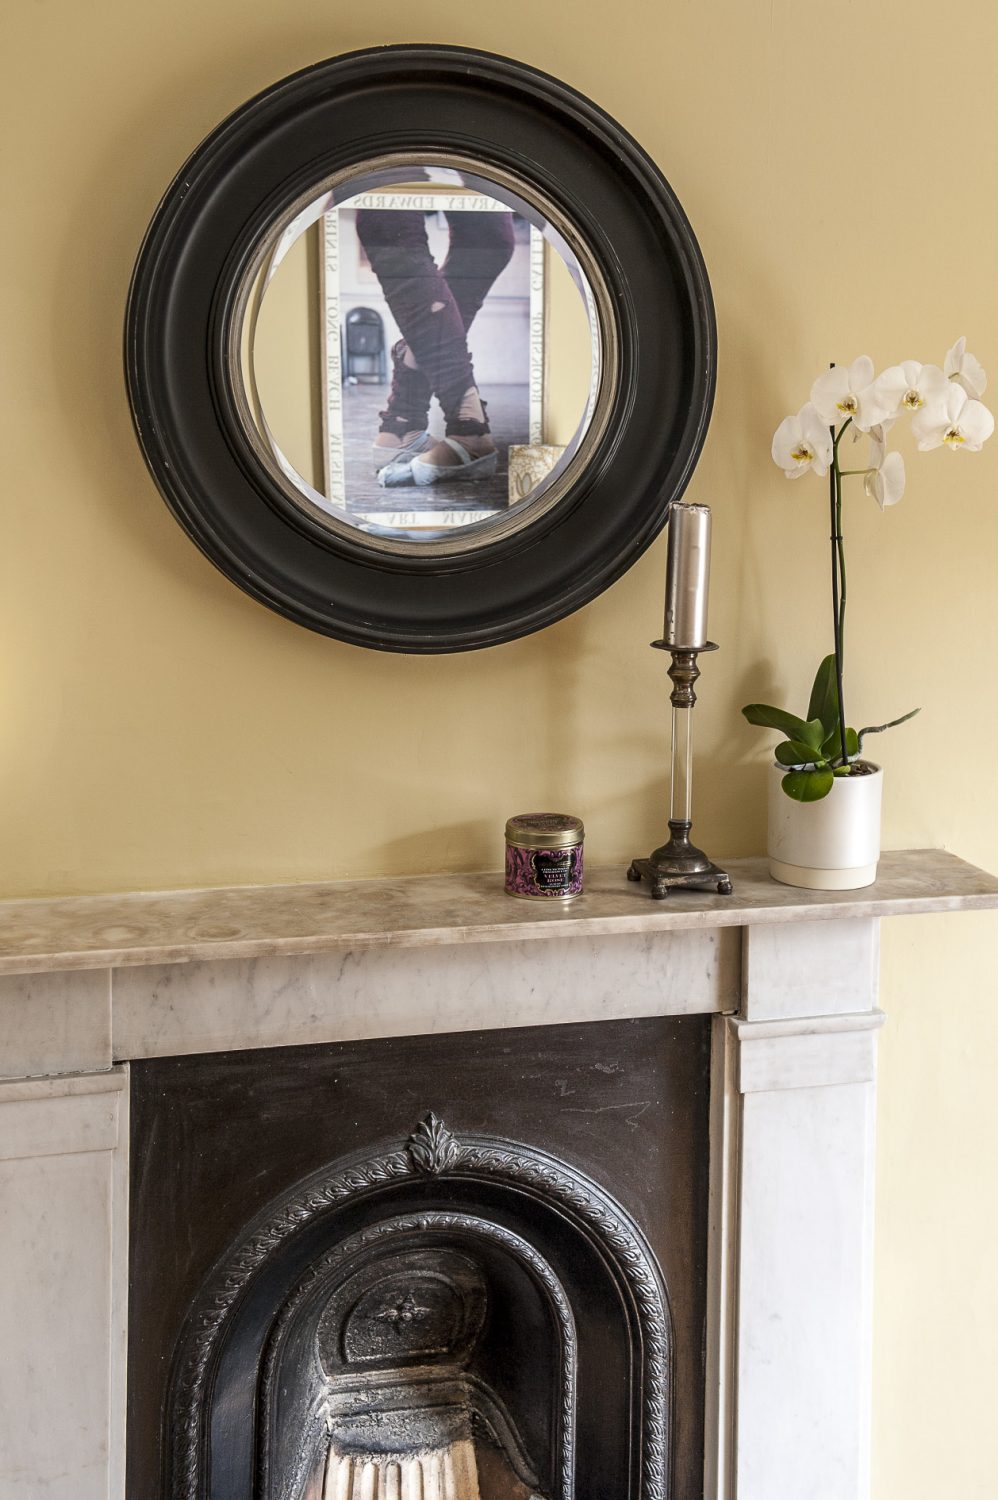 The marble fireplace in one of the spare rooms